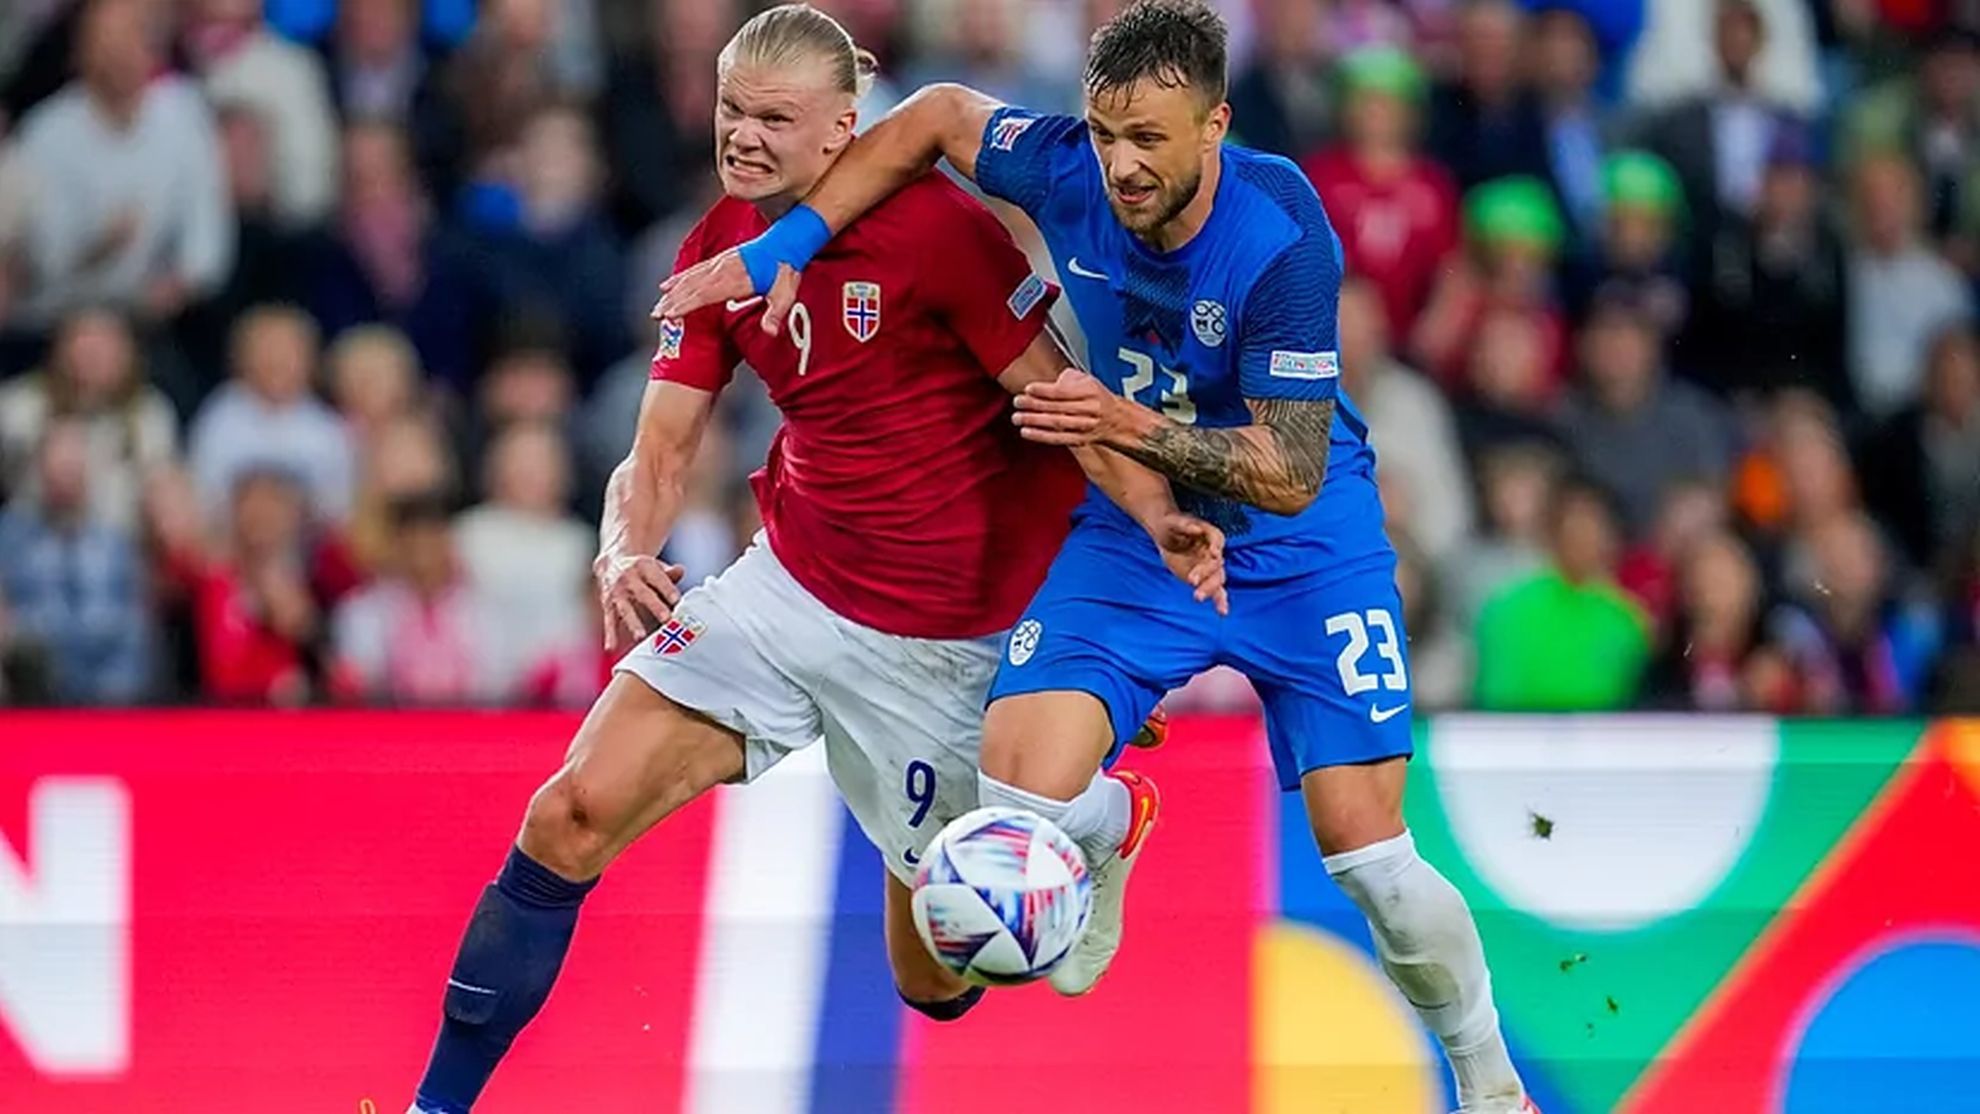 Haaland can't beat Oblak as Norway are held by Slovenia